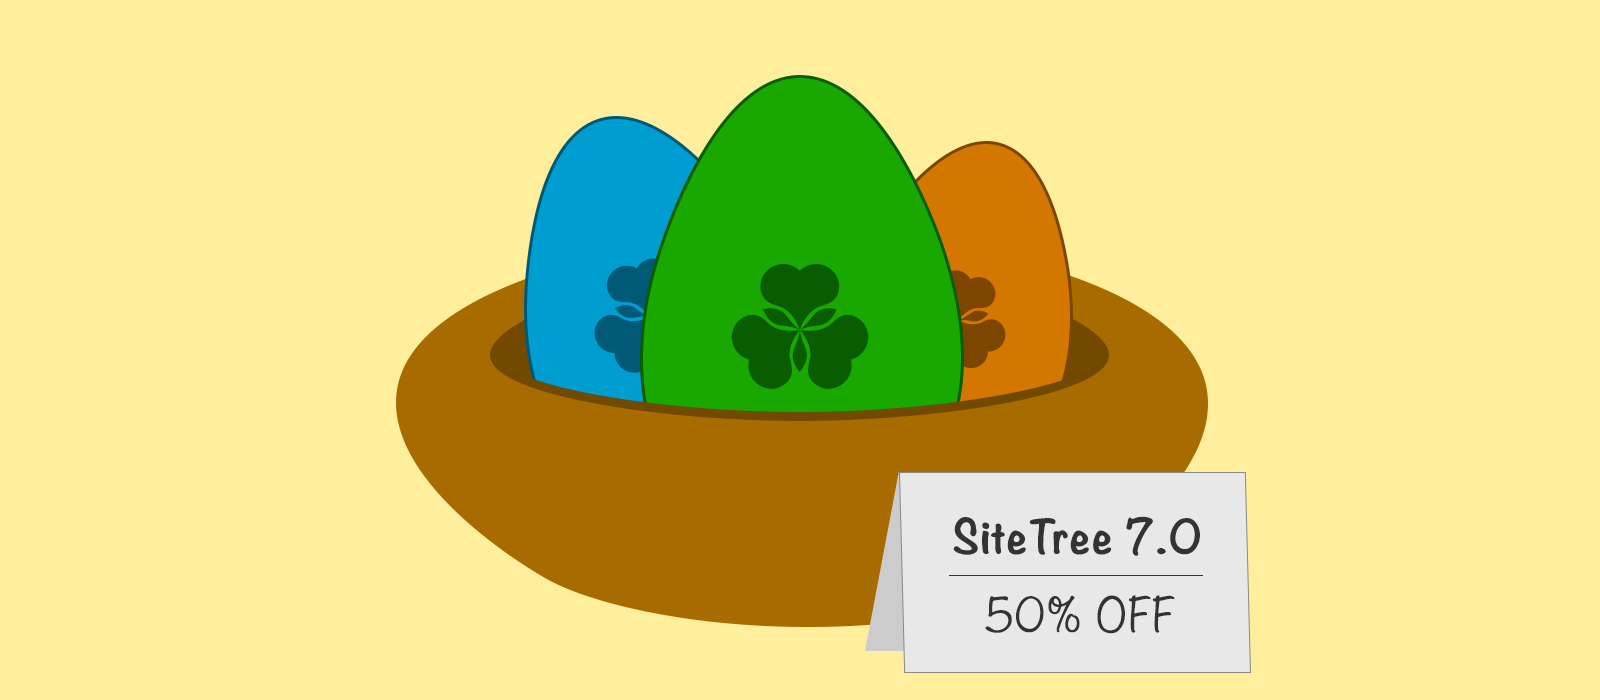 SiteTree 7.0: A Nest of New Features